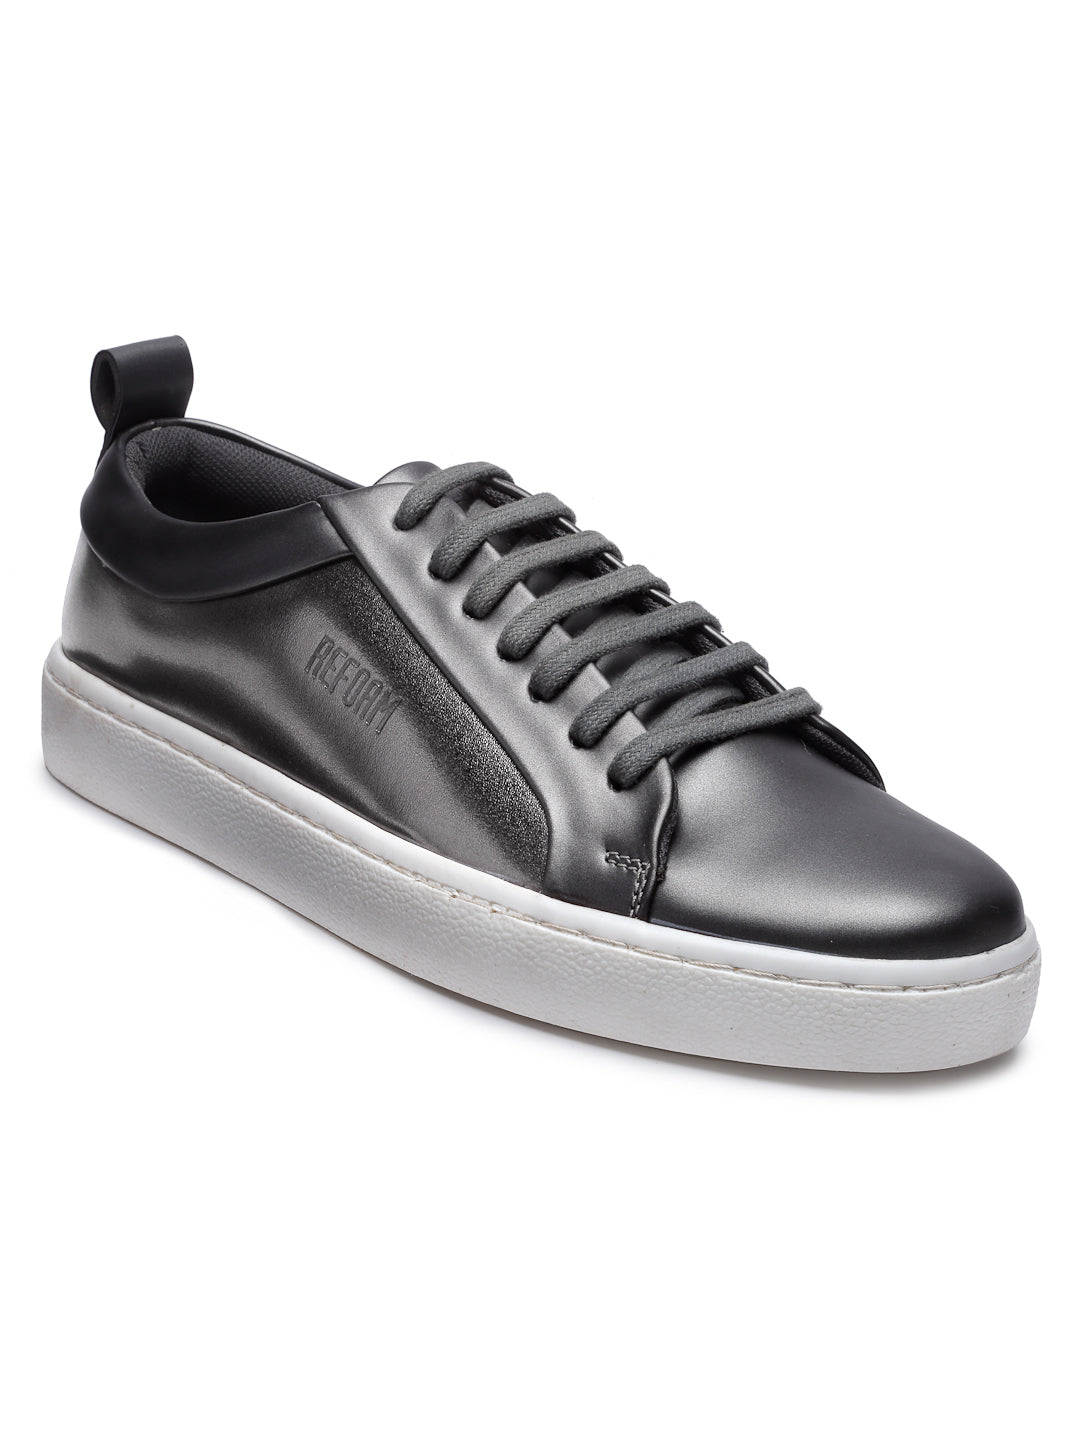 Women's Black Synthetic Leather Lace up Casual Sneaker